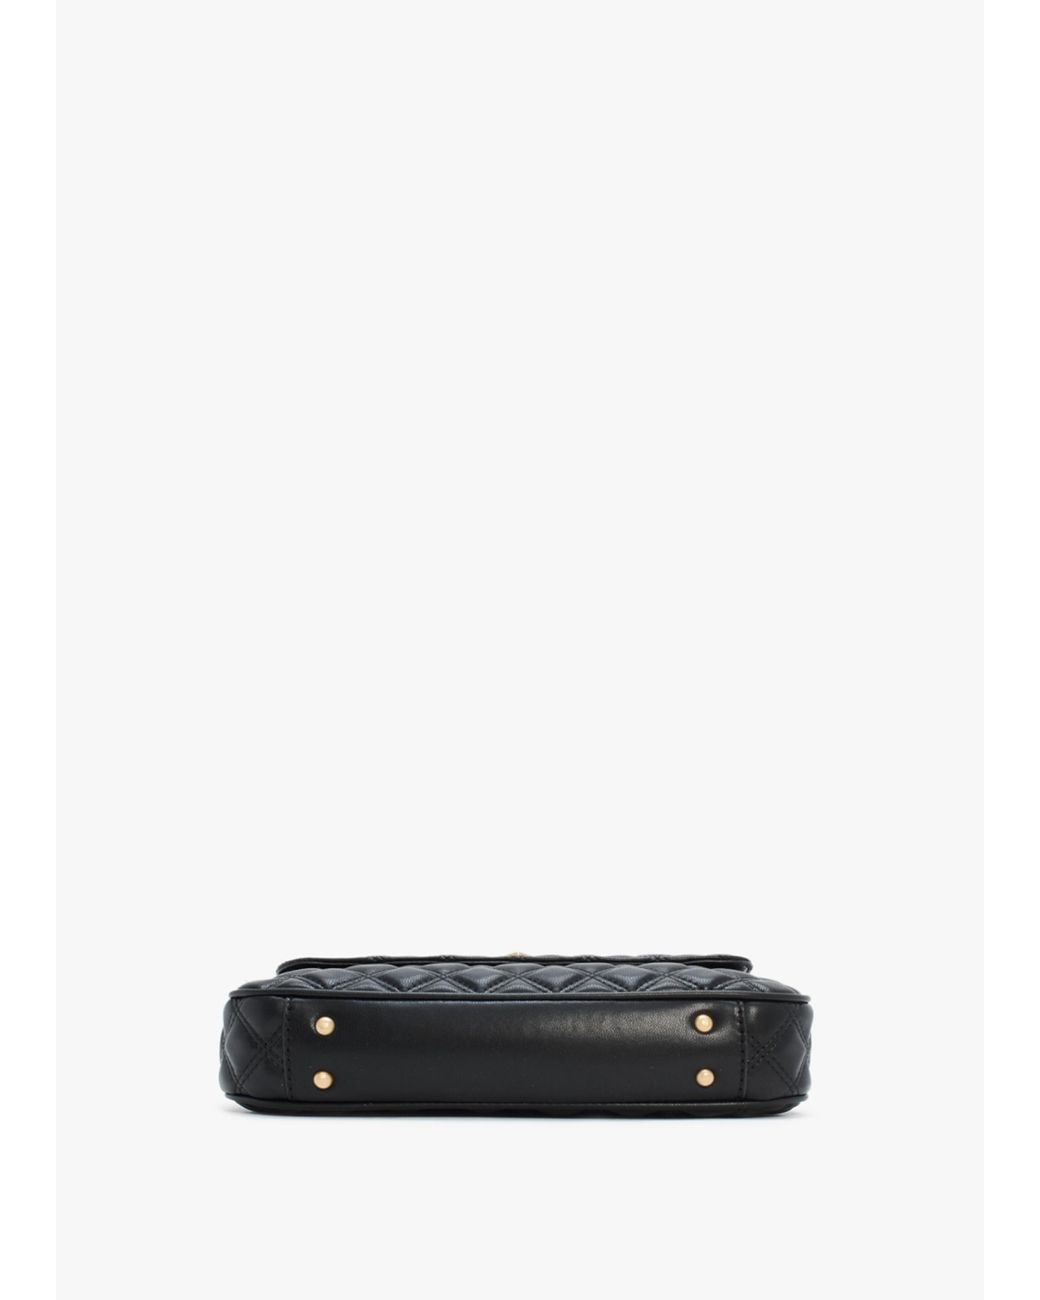 Guess Giully Black Quilted Cross-body Bag | Lyst